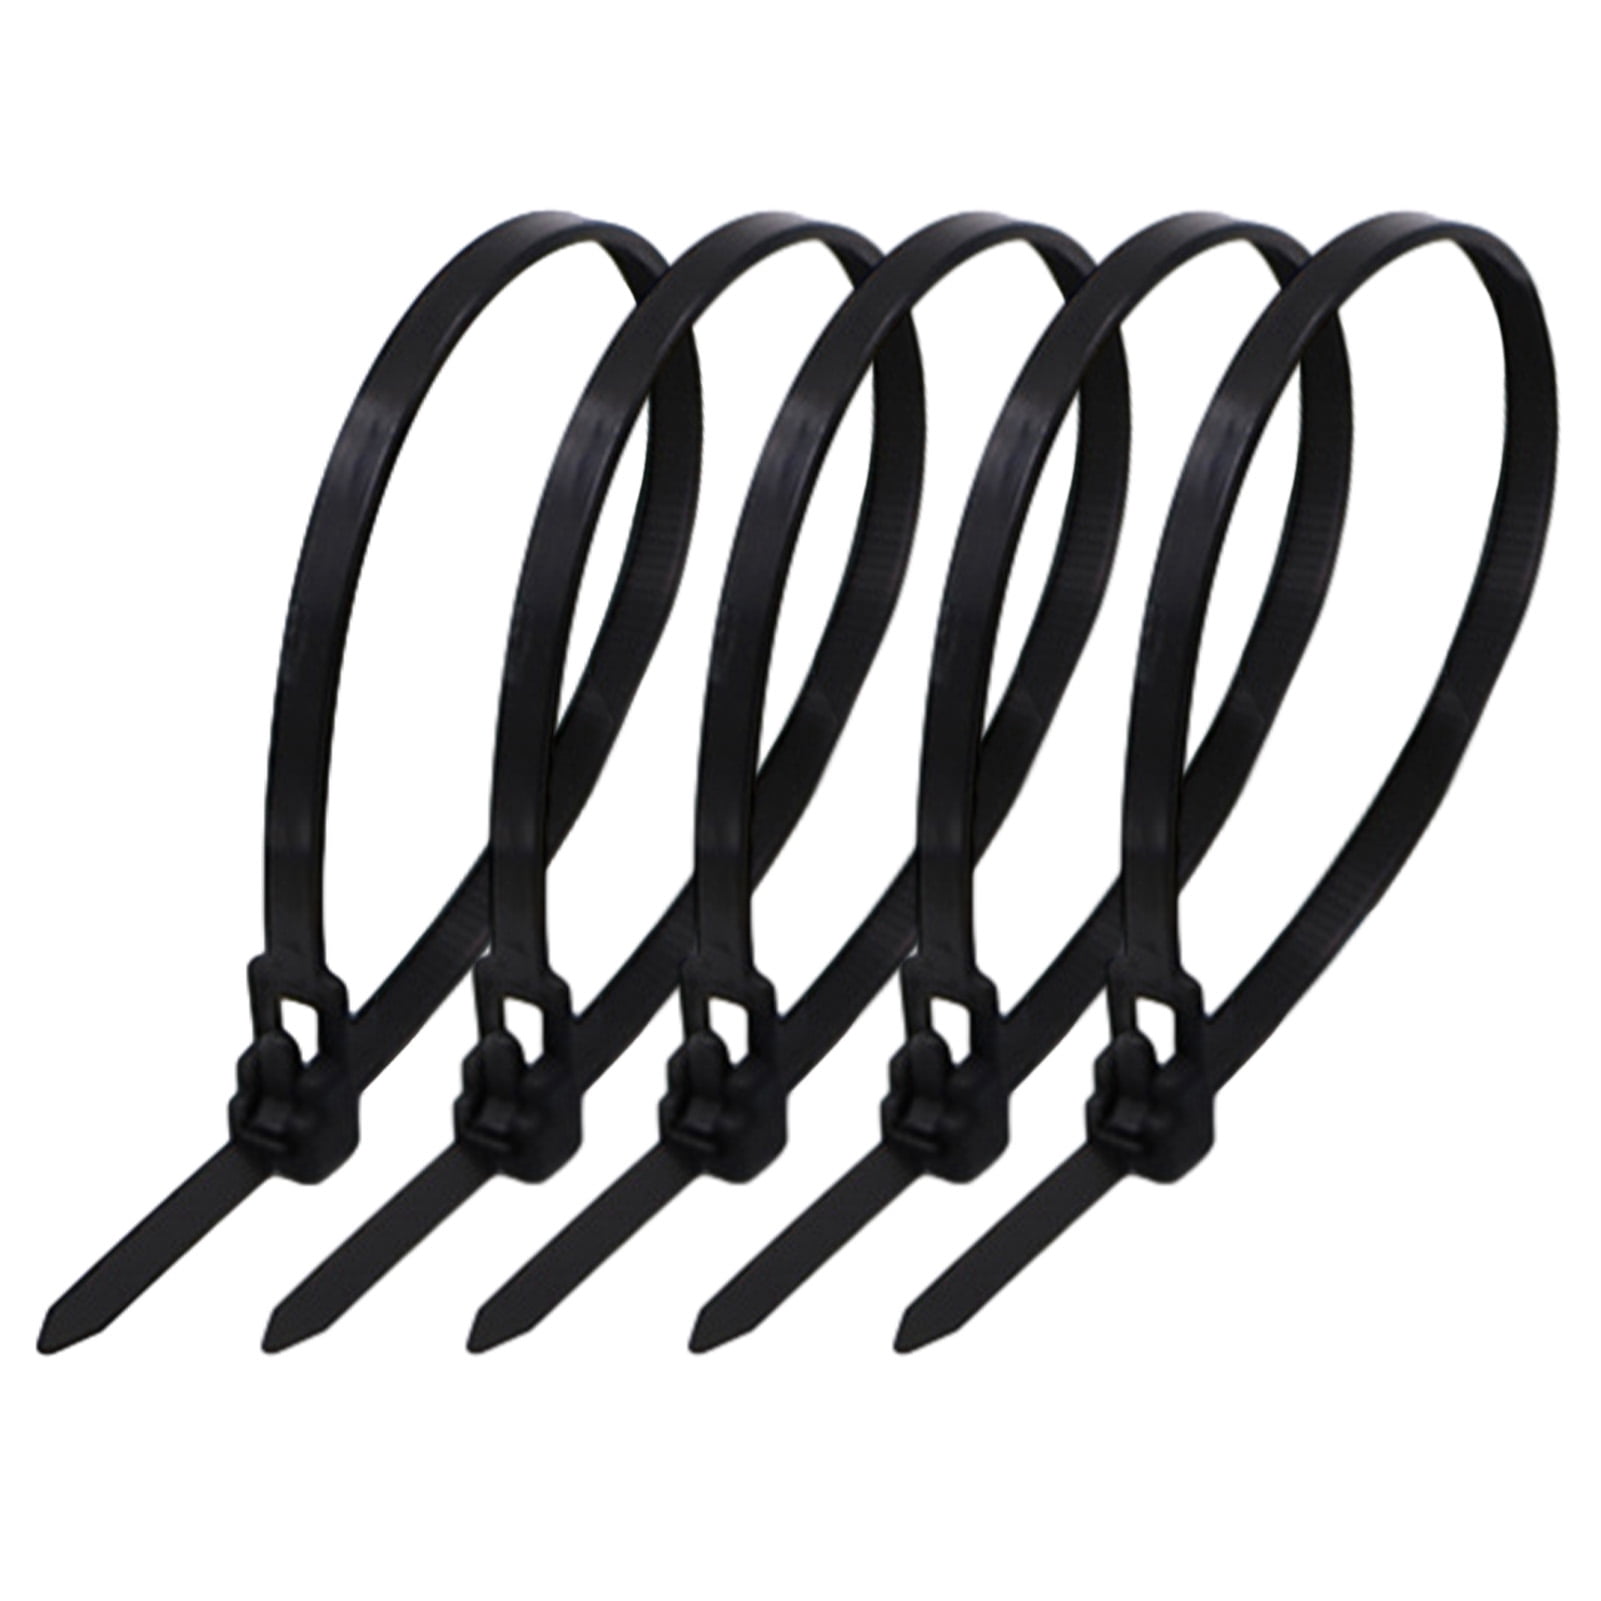 20pcs Plastic Releasable Reusable High Quality Black and White Nylon Cable Ties 